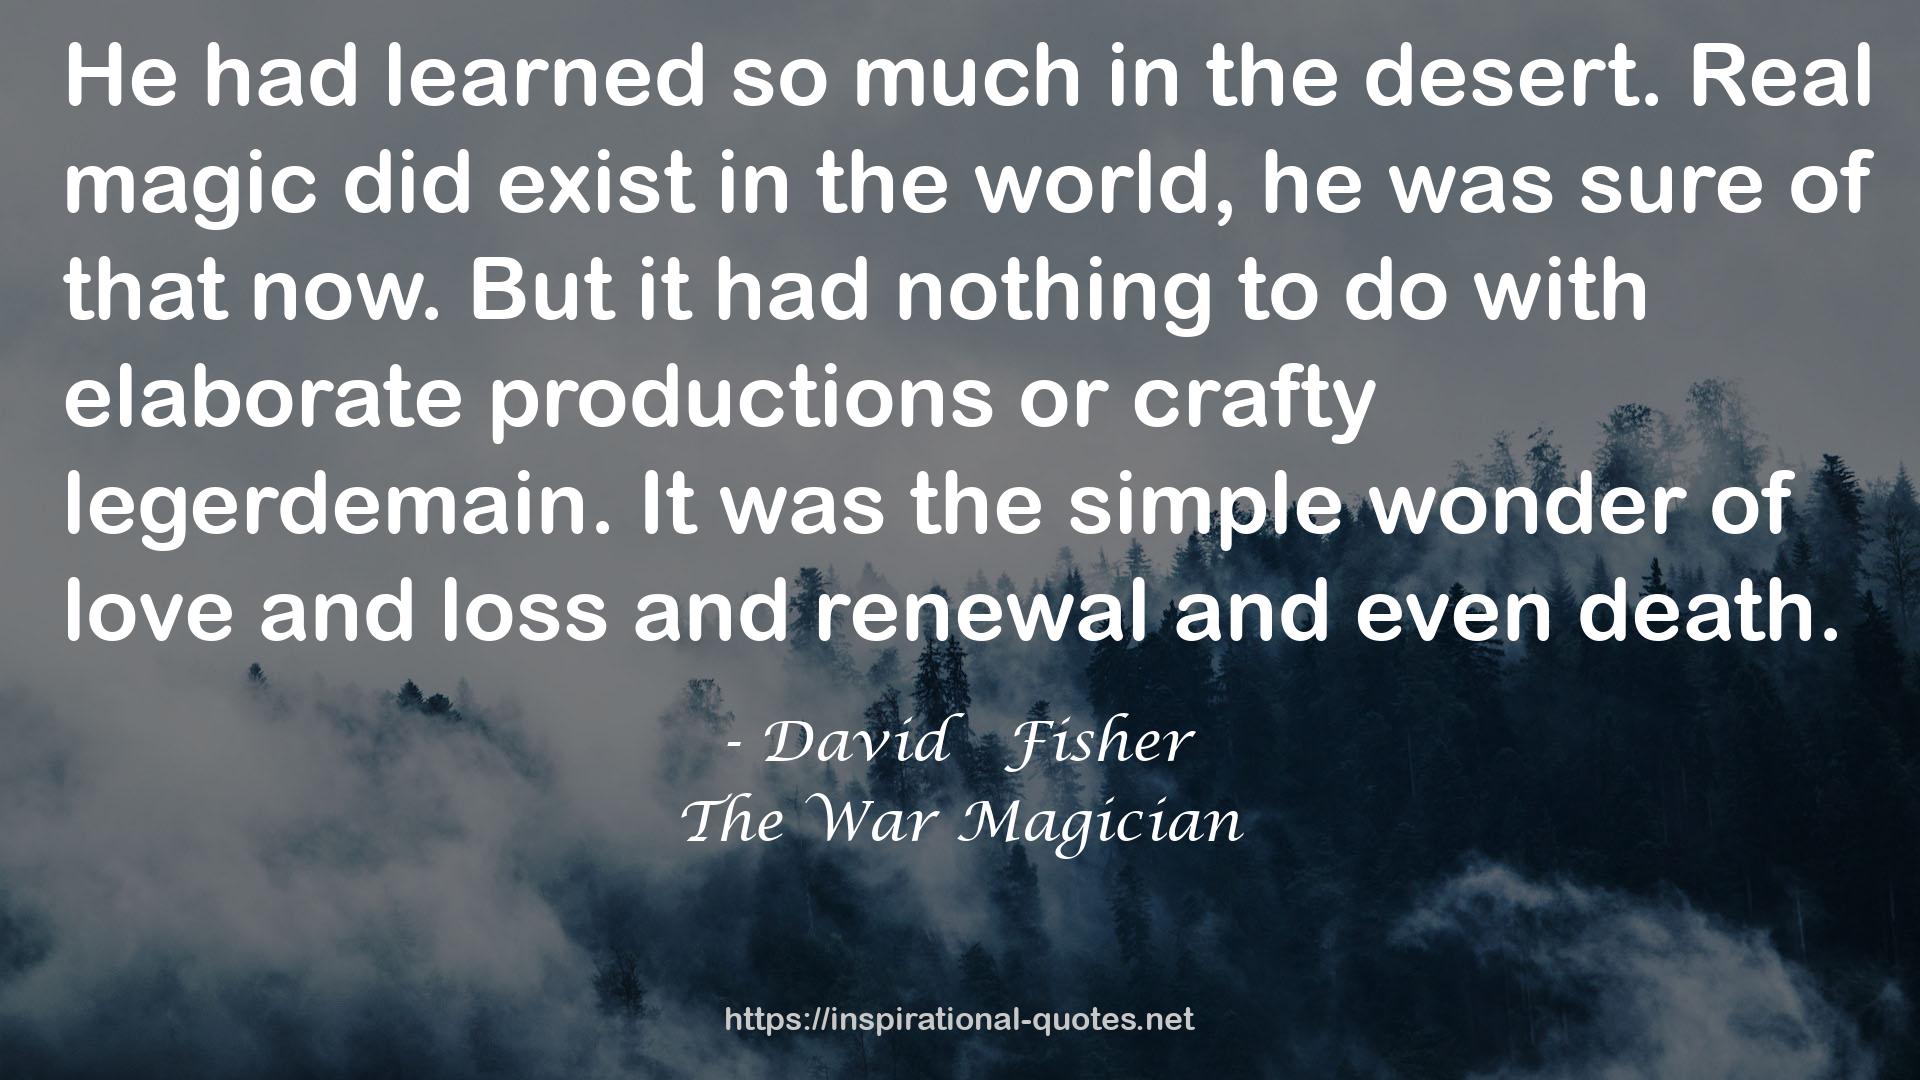 The War Magician QUOTES